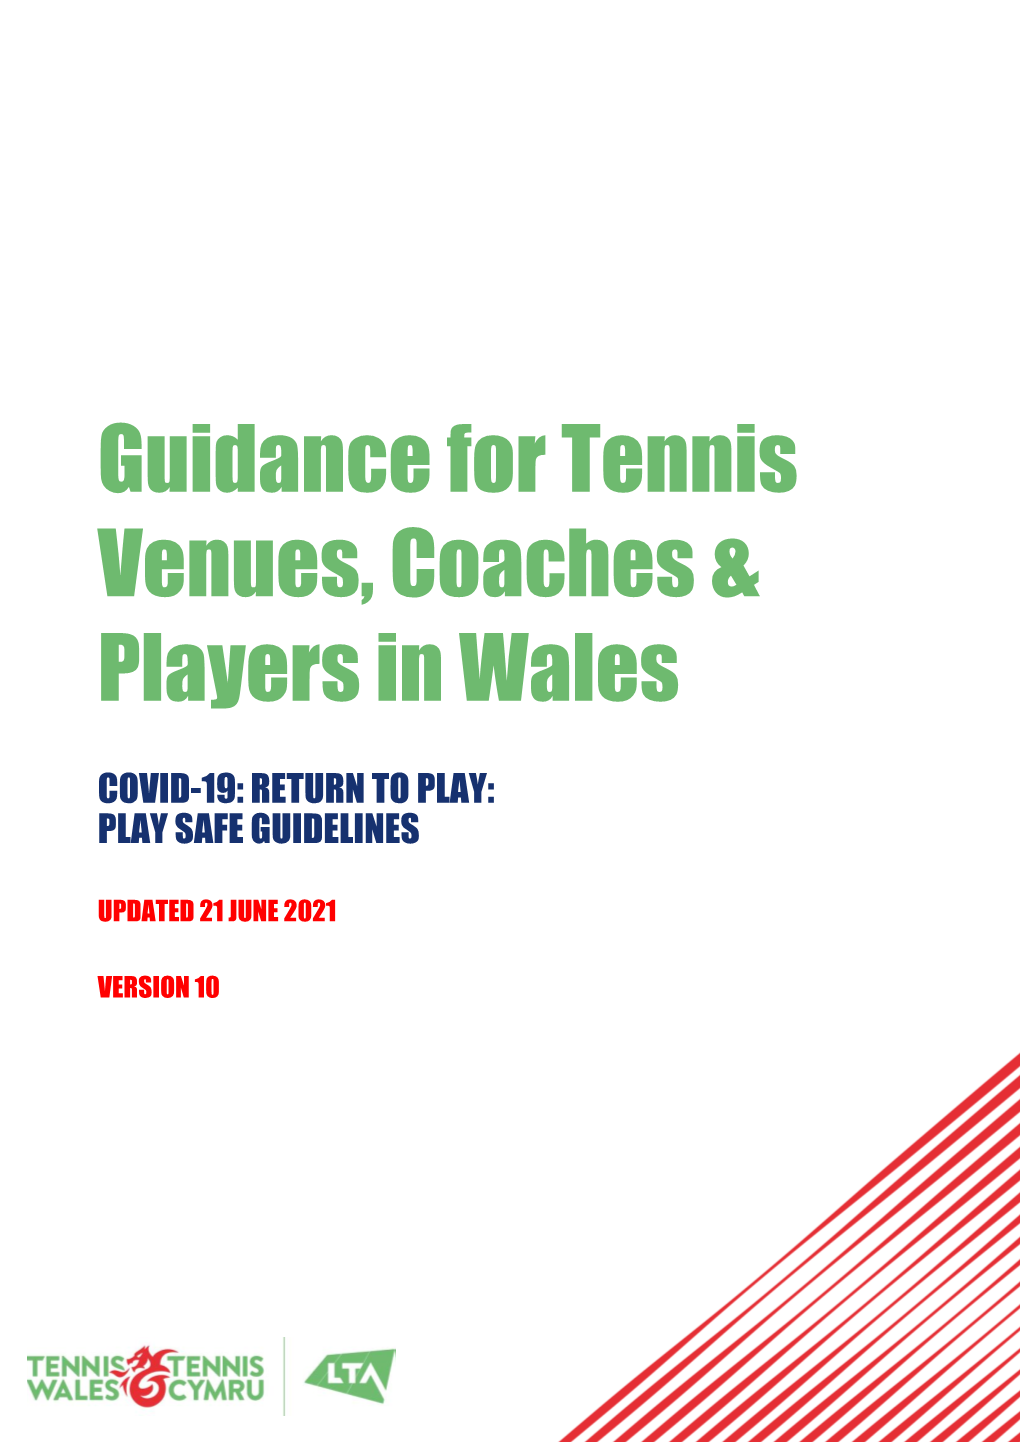 Guidance for Tennis Venues, Coaches & Players in Wales